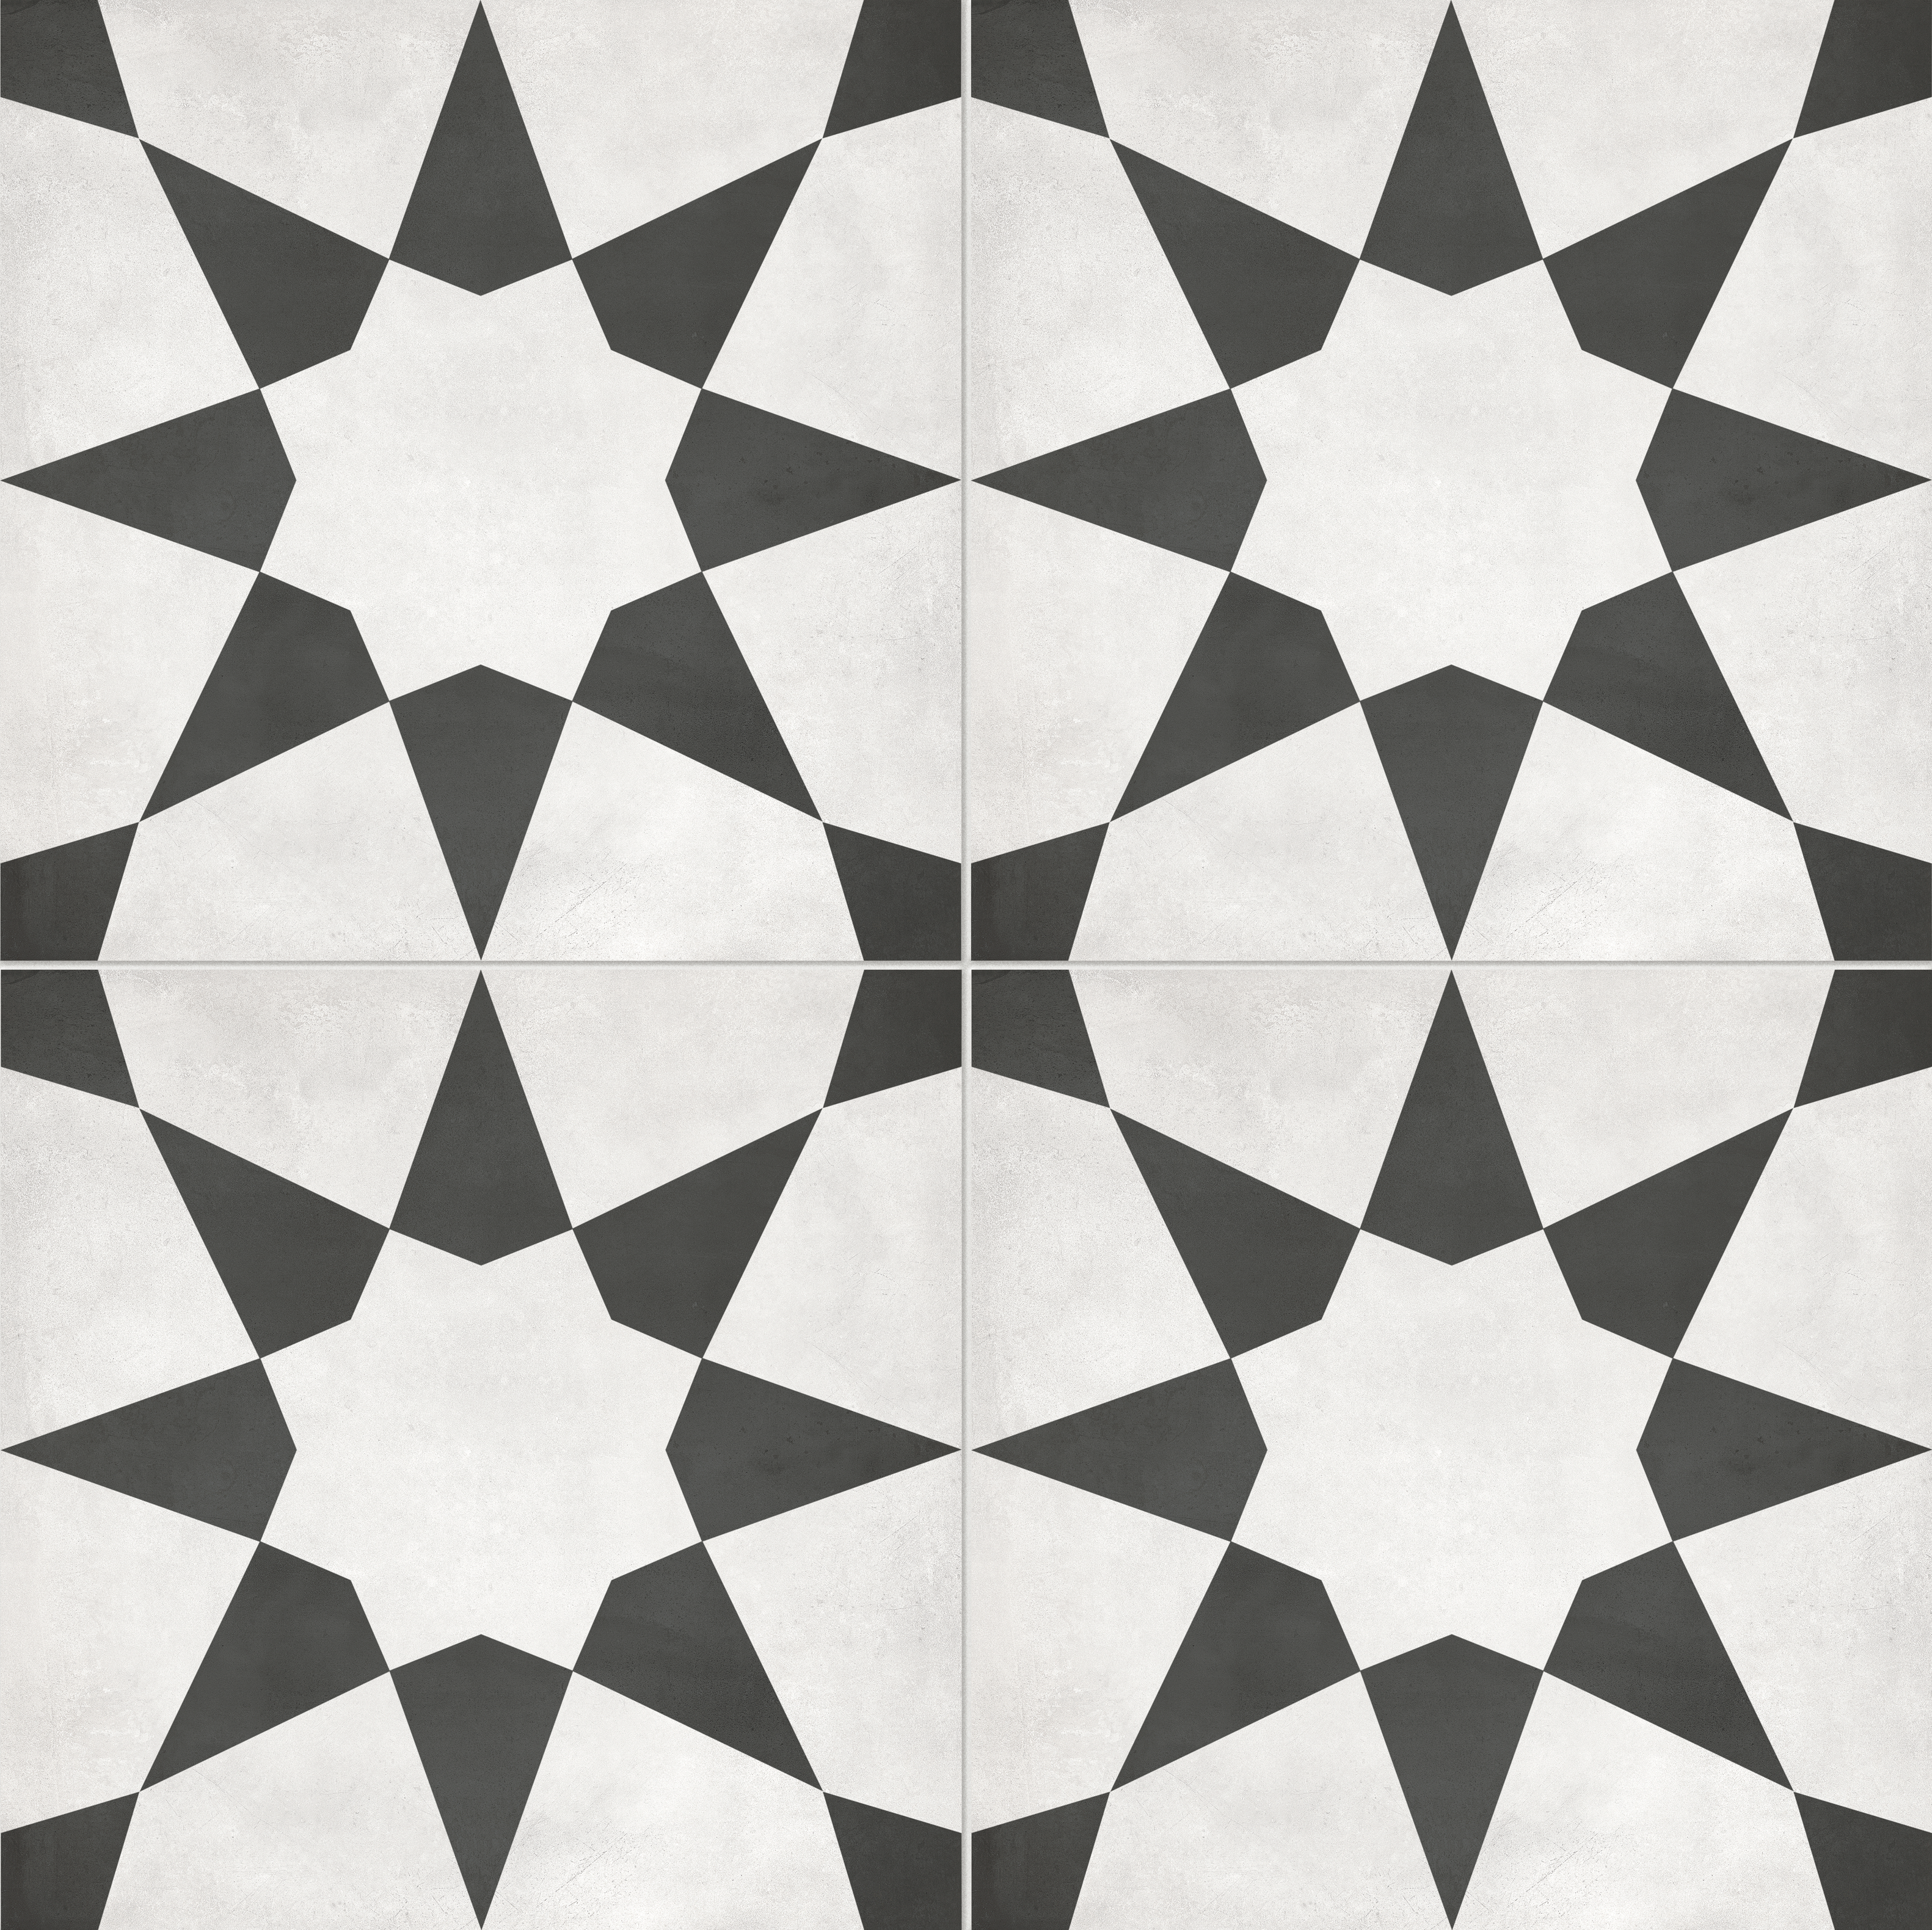 monochrome print pattern glazed porcelain deco tile print blend from form anatolia collection distributed by surface group international matte finish pressed edge 8x8 square shape